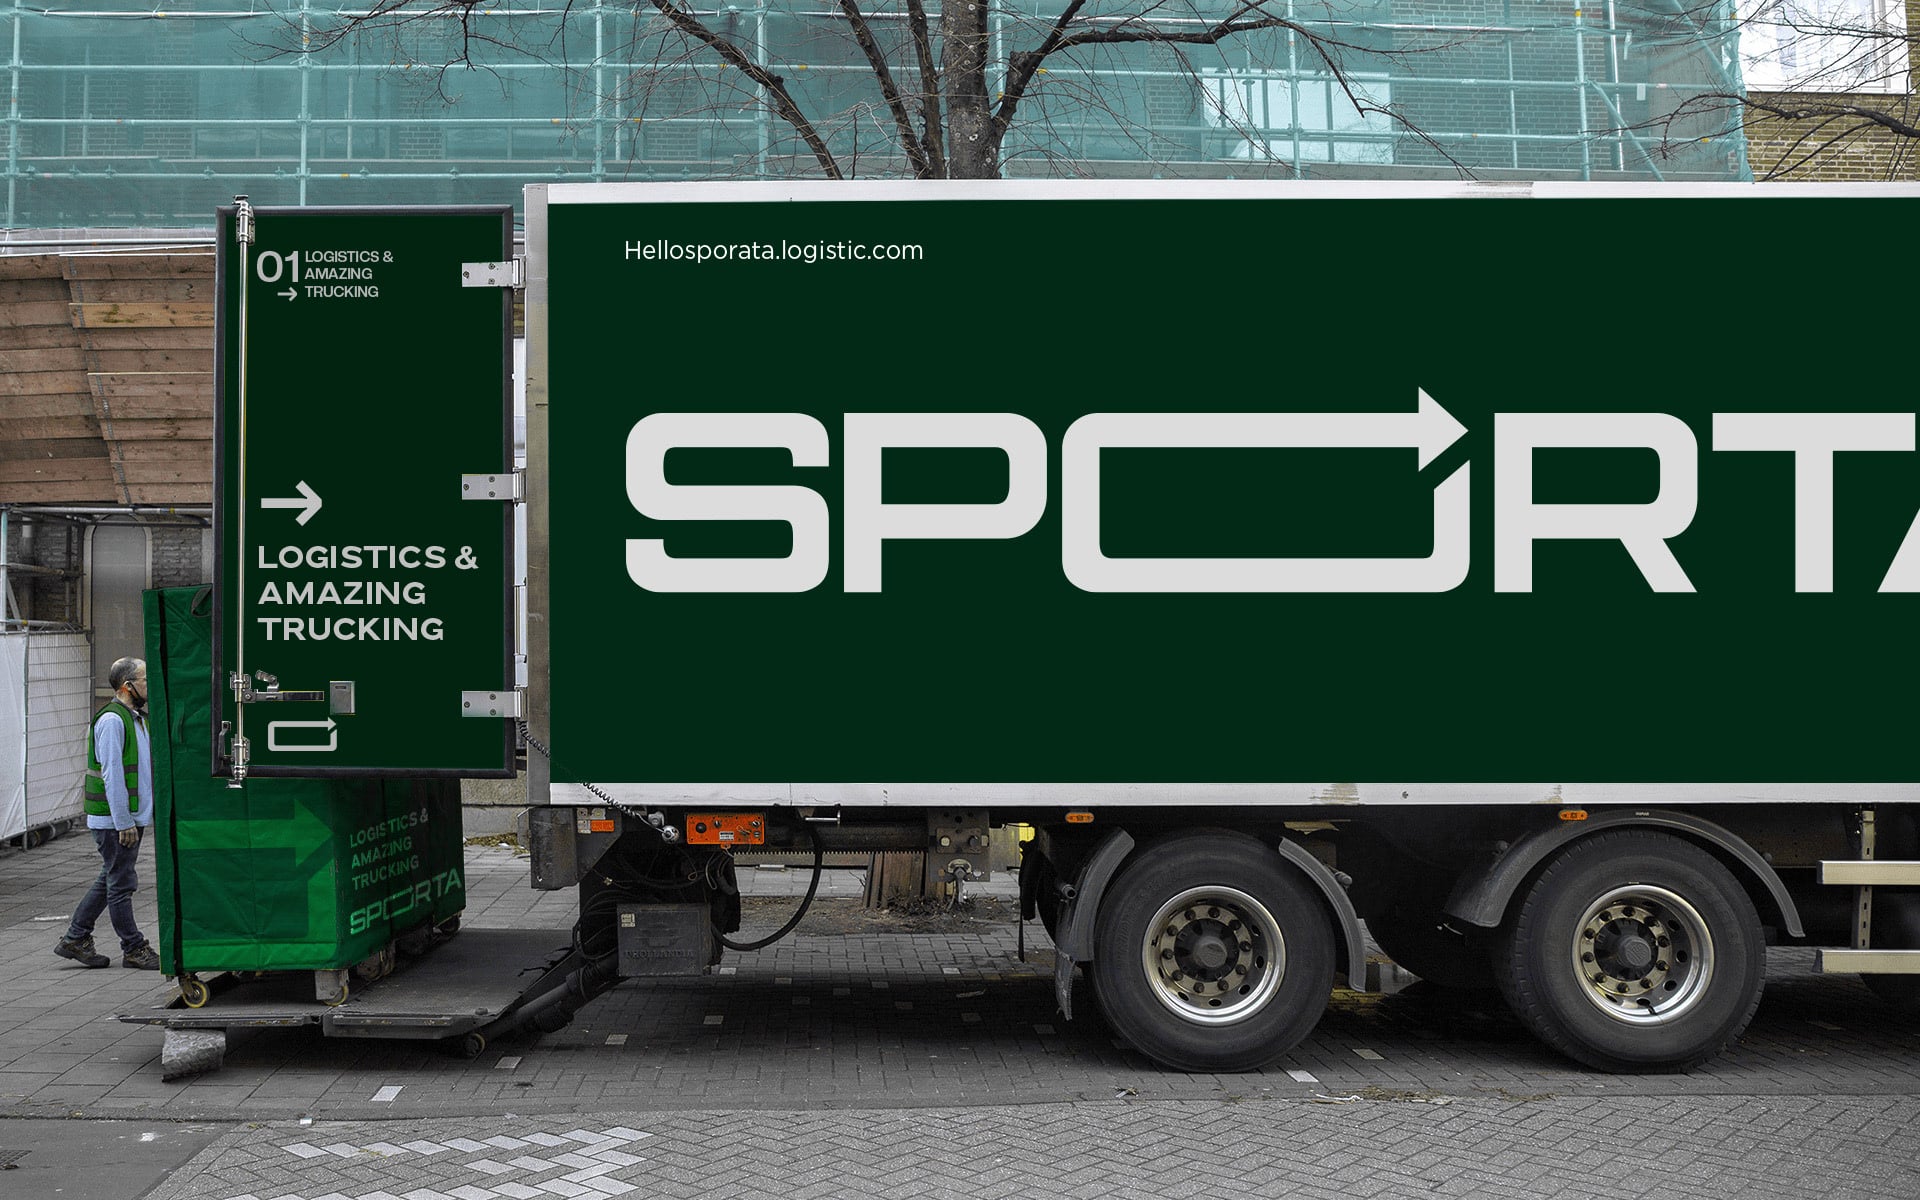 Sporta Logistics and Trucking in Vietnamese Branding by Anothern Creative